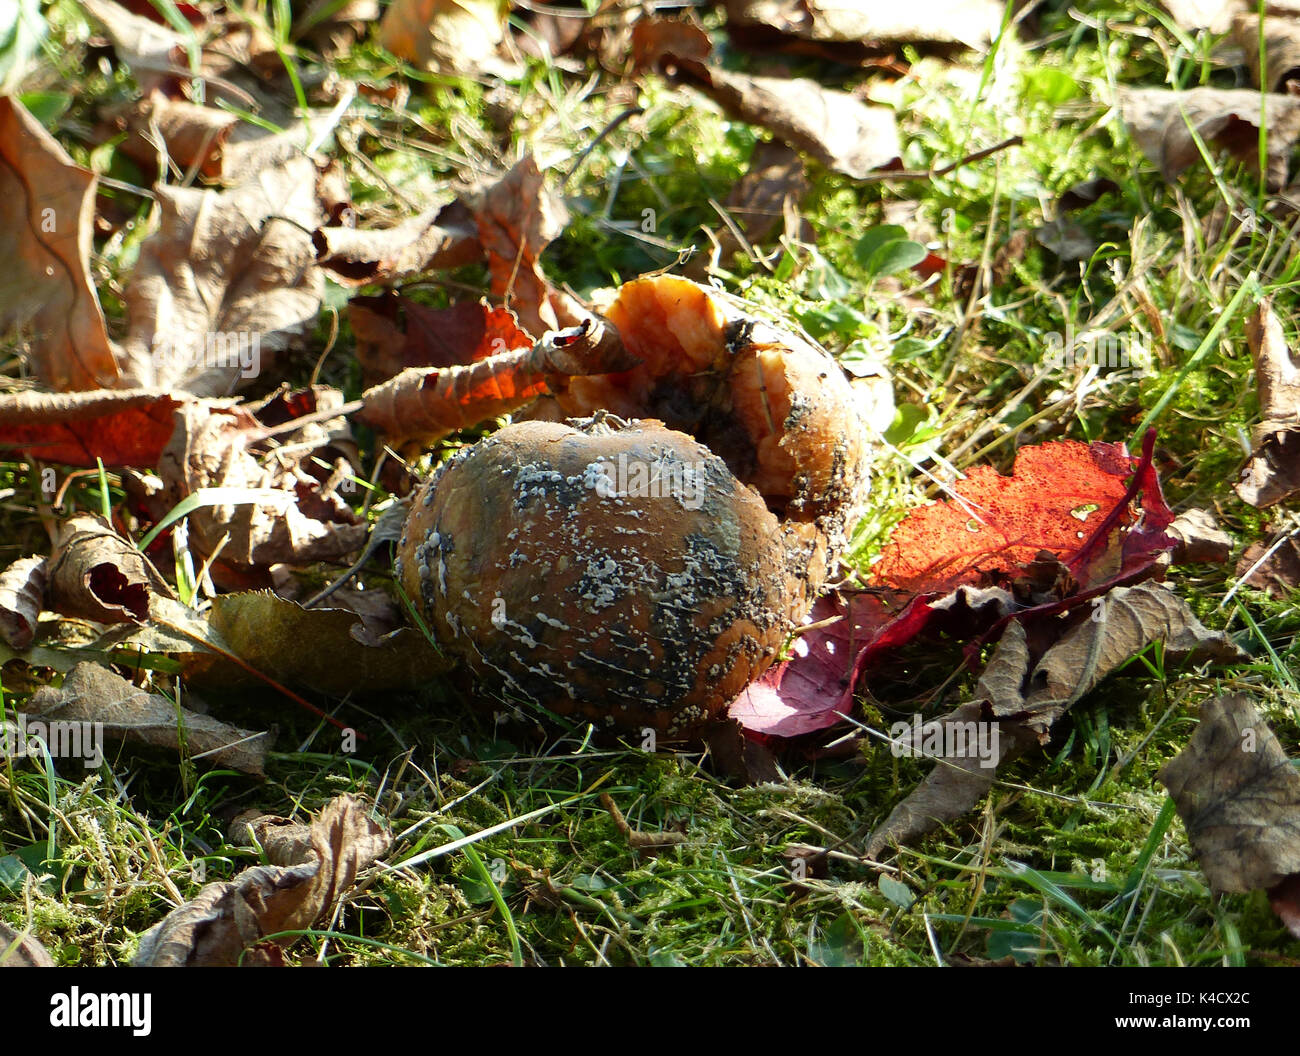 Windfall With Blight Lying In The Grass Stock Photo